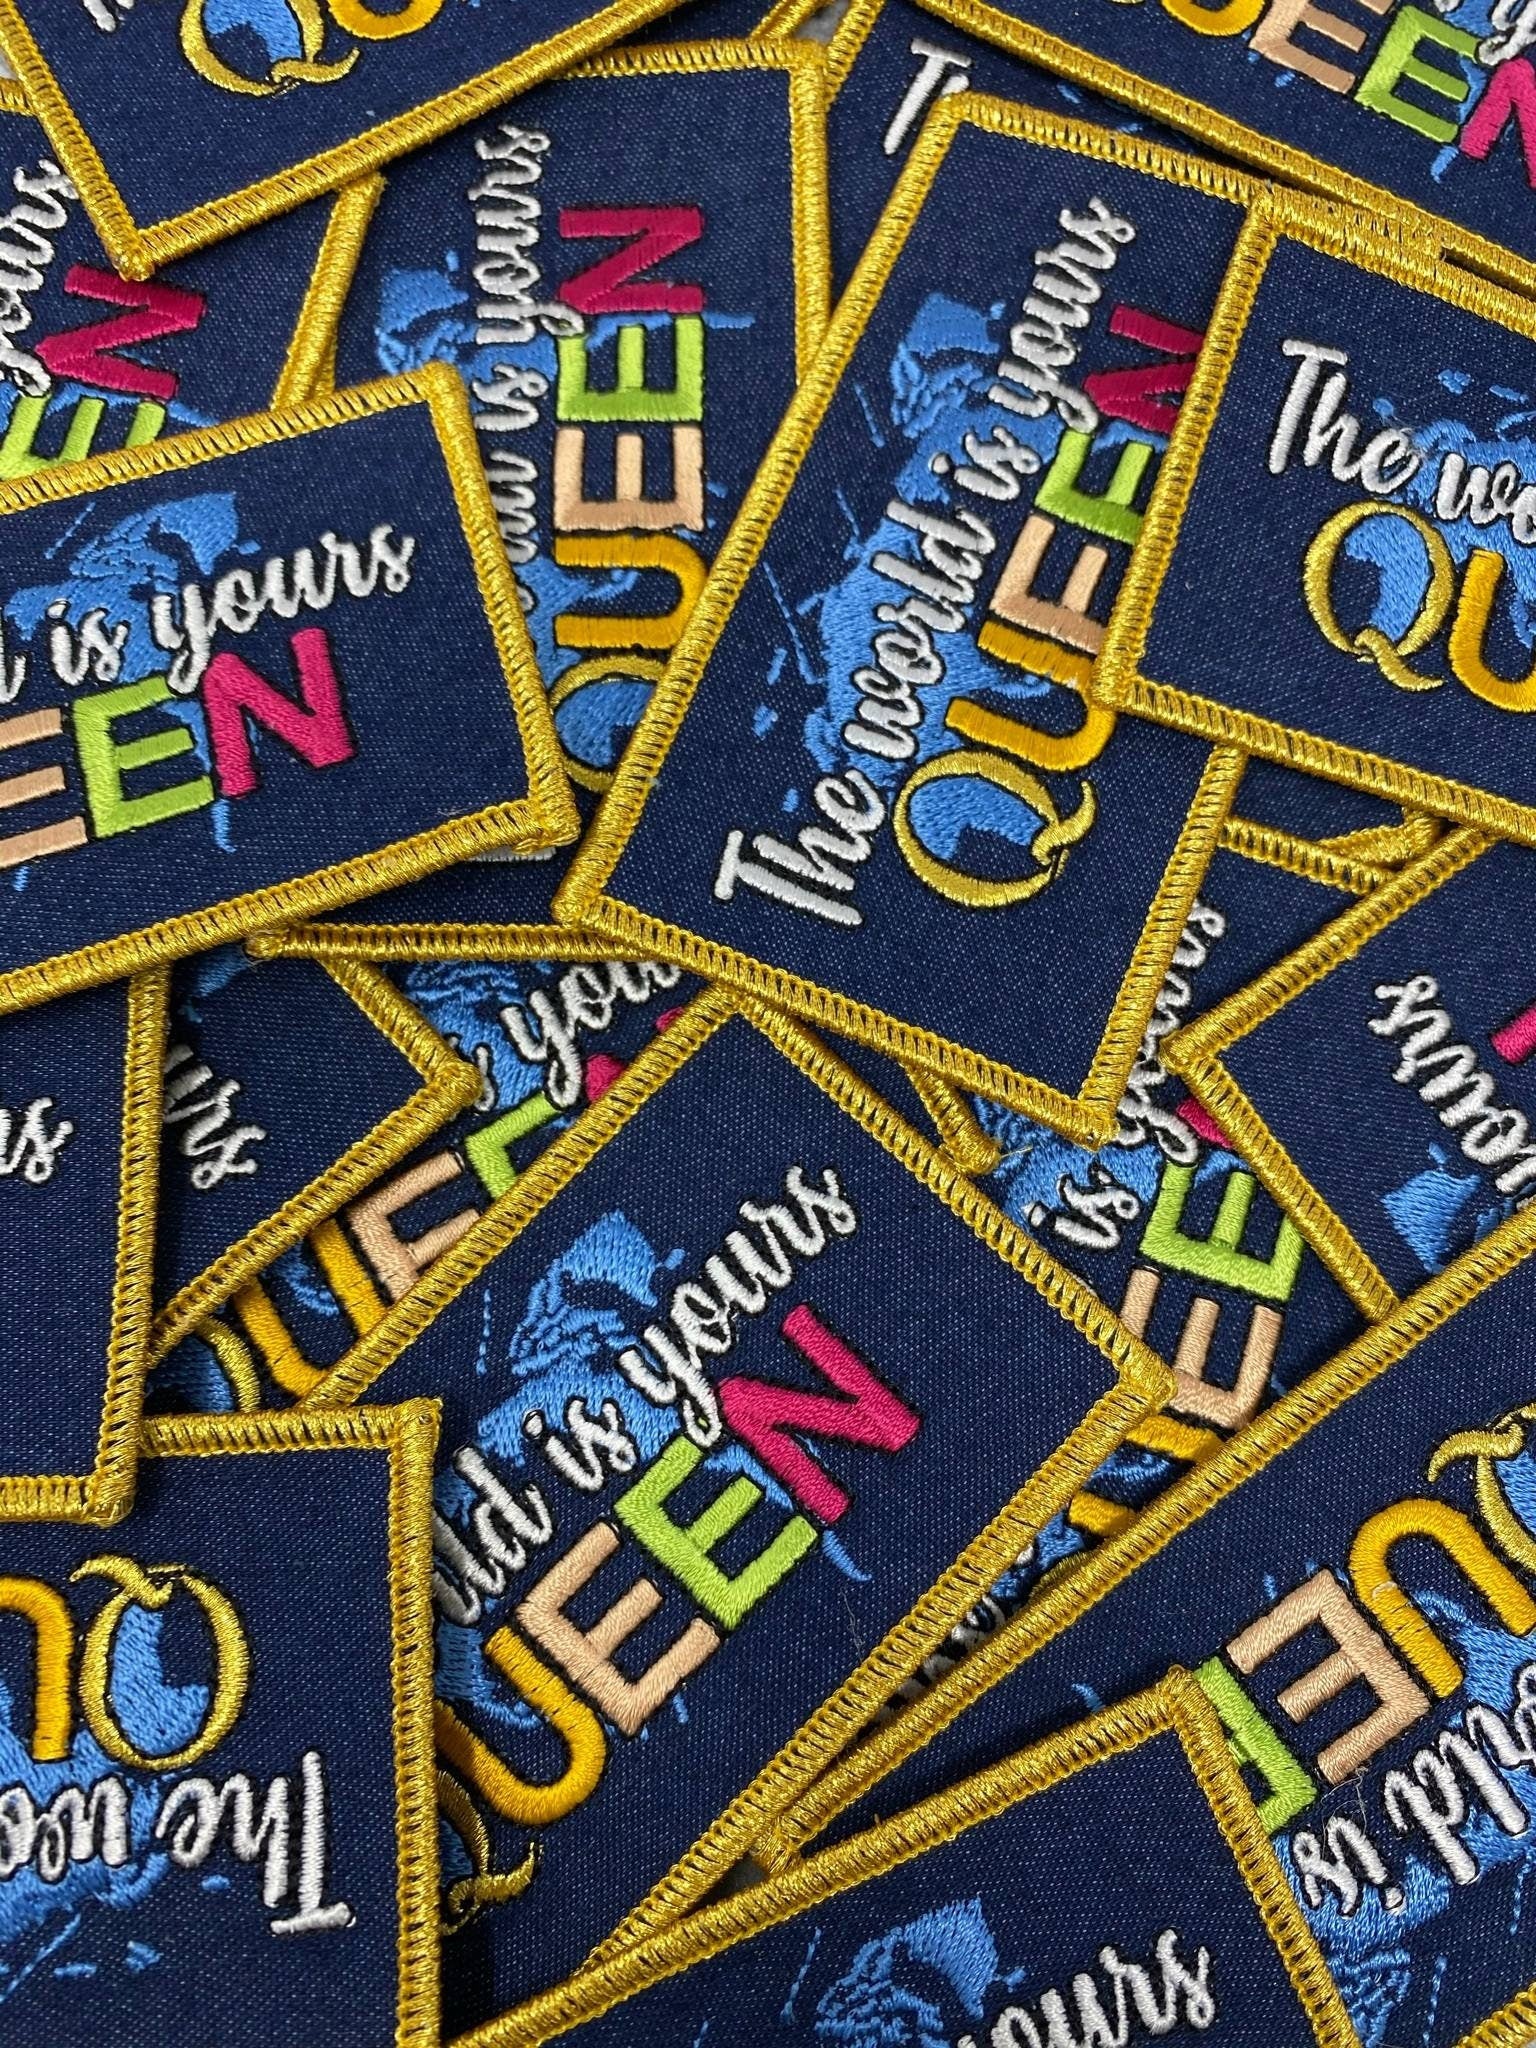 New Arrival, EXCLUSIVE "The World is Yours Queen" Iron-on Patch, Size 3"x2", Denim Embroidered Patch for Clothing and Accessories, Blue Jean